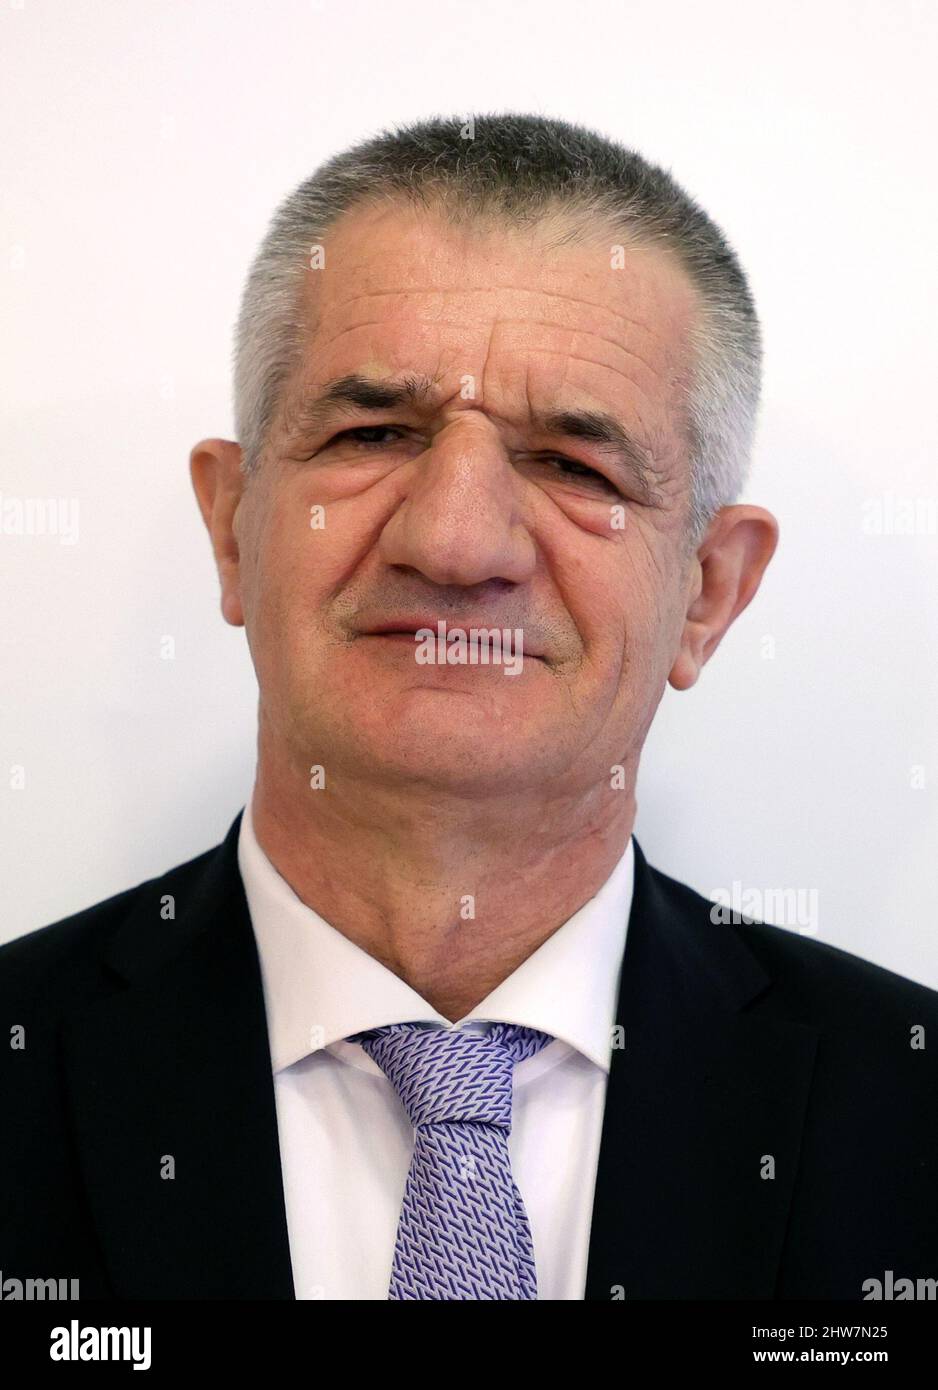 Jean Lassalle, candidate of the French party "Resistons !" for the 2022  French presidential election, poses for Reuters at the National Assembly in  Paris, France, March 4, 2022. REUTERS/Sarah Meyssonnier Stock Photo - Alamy